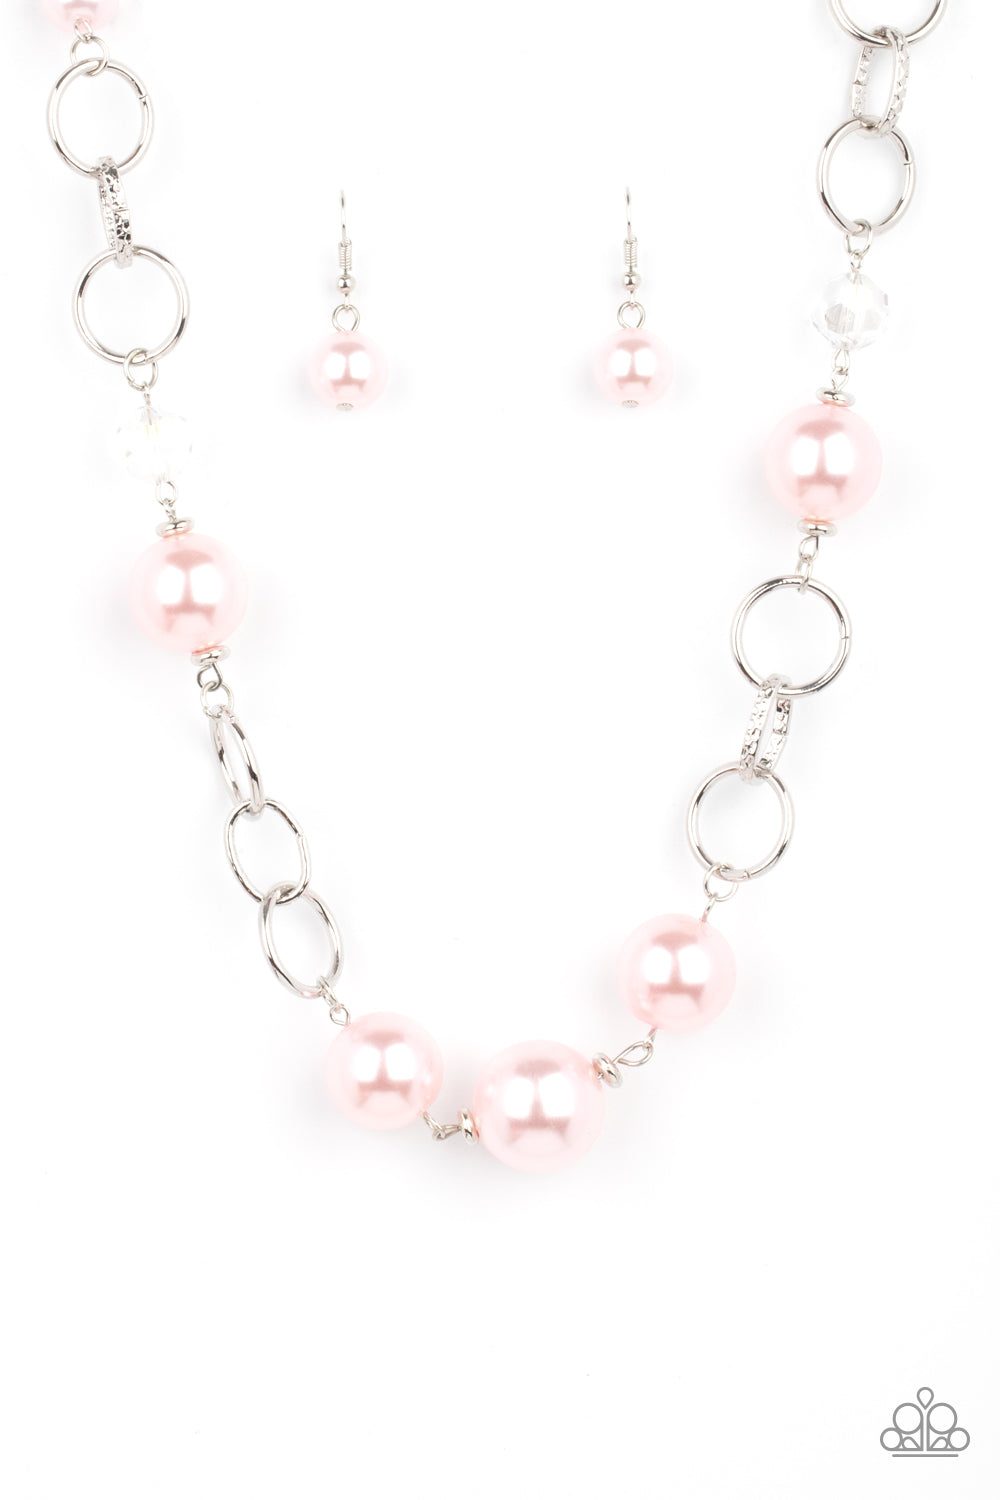 Paparazzi Accessories New Age Novelty - Pink Pearl Necklaces sections of bold silver links, oversized pink pearls, and glassy crystal-like beads haphazardly connect below the collar, creating a dramatic display. Features an adjustable clasp closure.  Sold as one individual necklace. Includes one pair of matching earrings.  Paparazzi Jewelry is lead and nickel free so it's perfect for sensitive skin too!